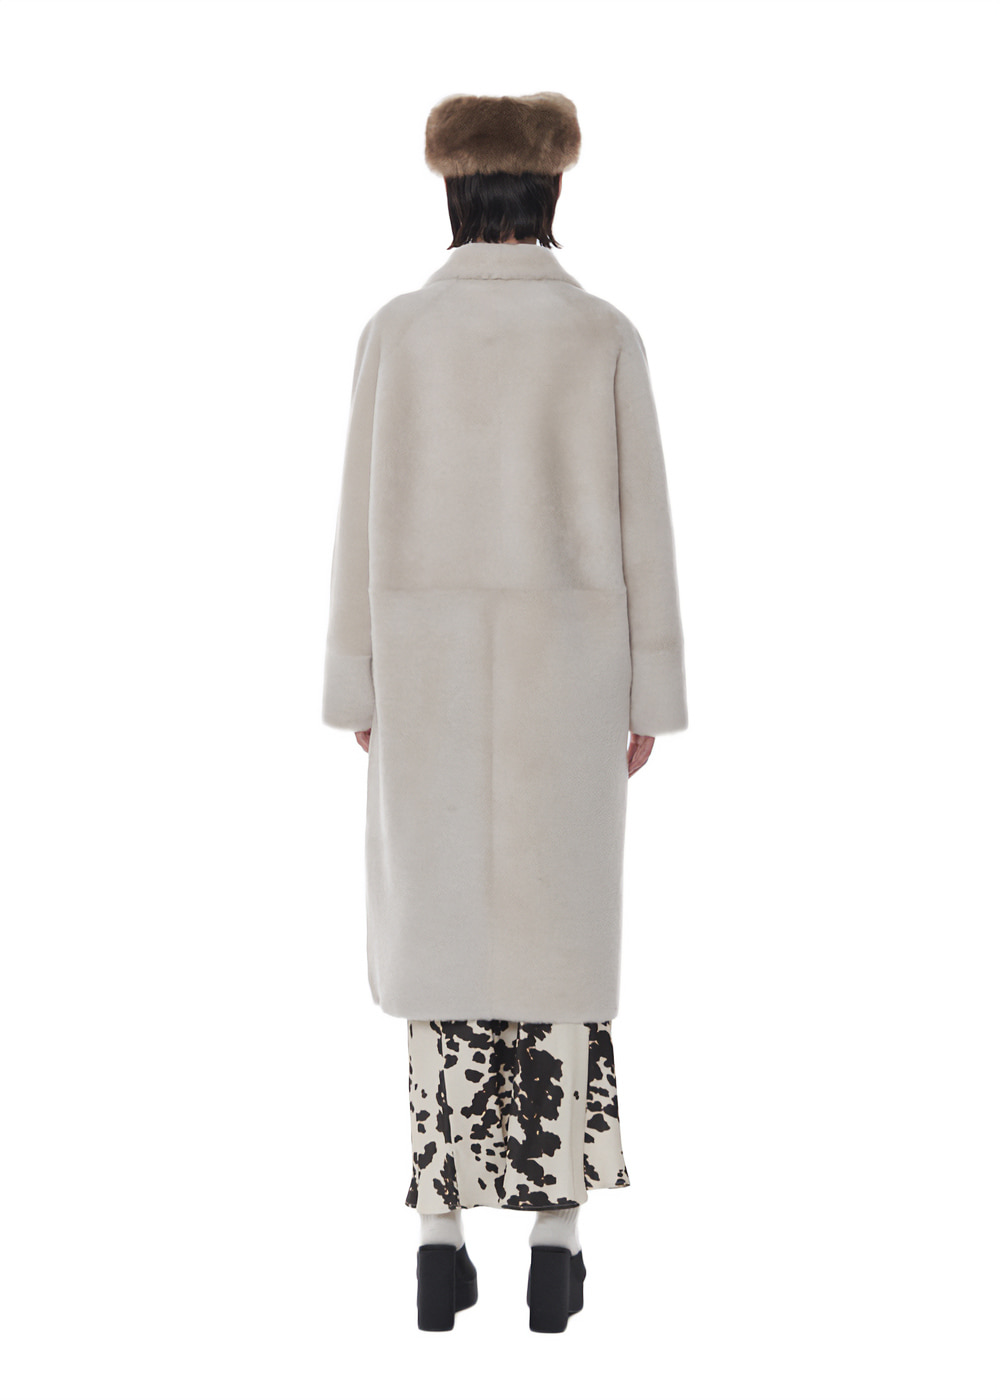 Merino Tailored Collar Long Sheraling Coat IvoryMaterial Spanish MerinoPrice 3,890,000This is a long searing coat made of Merino material that is light, soft with a tailored collar.